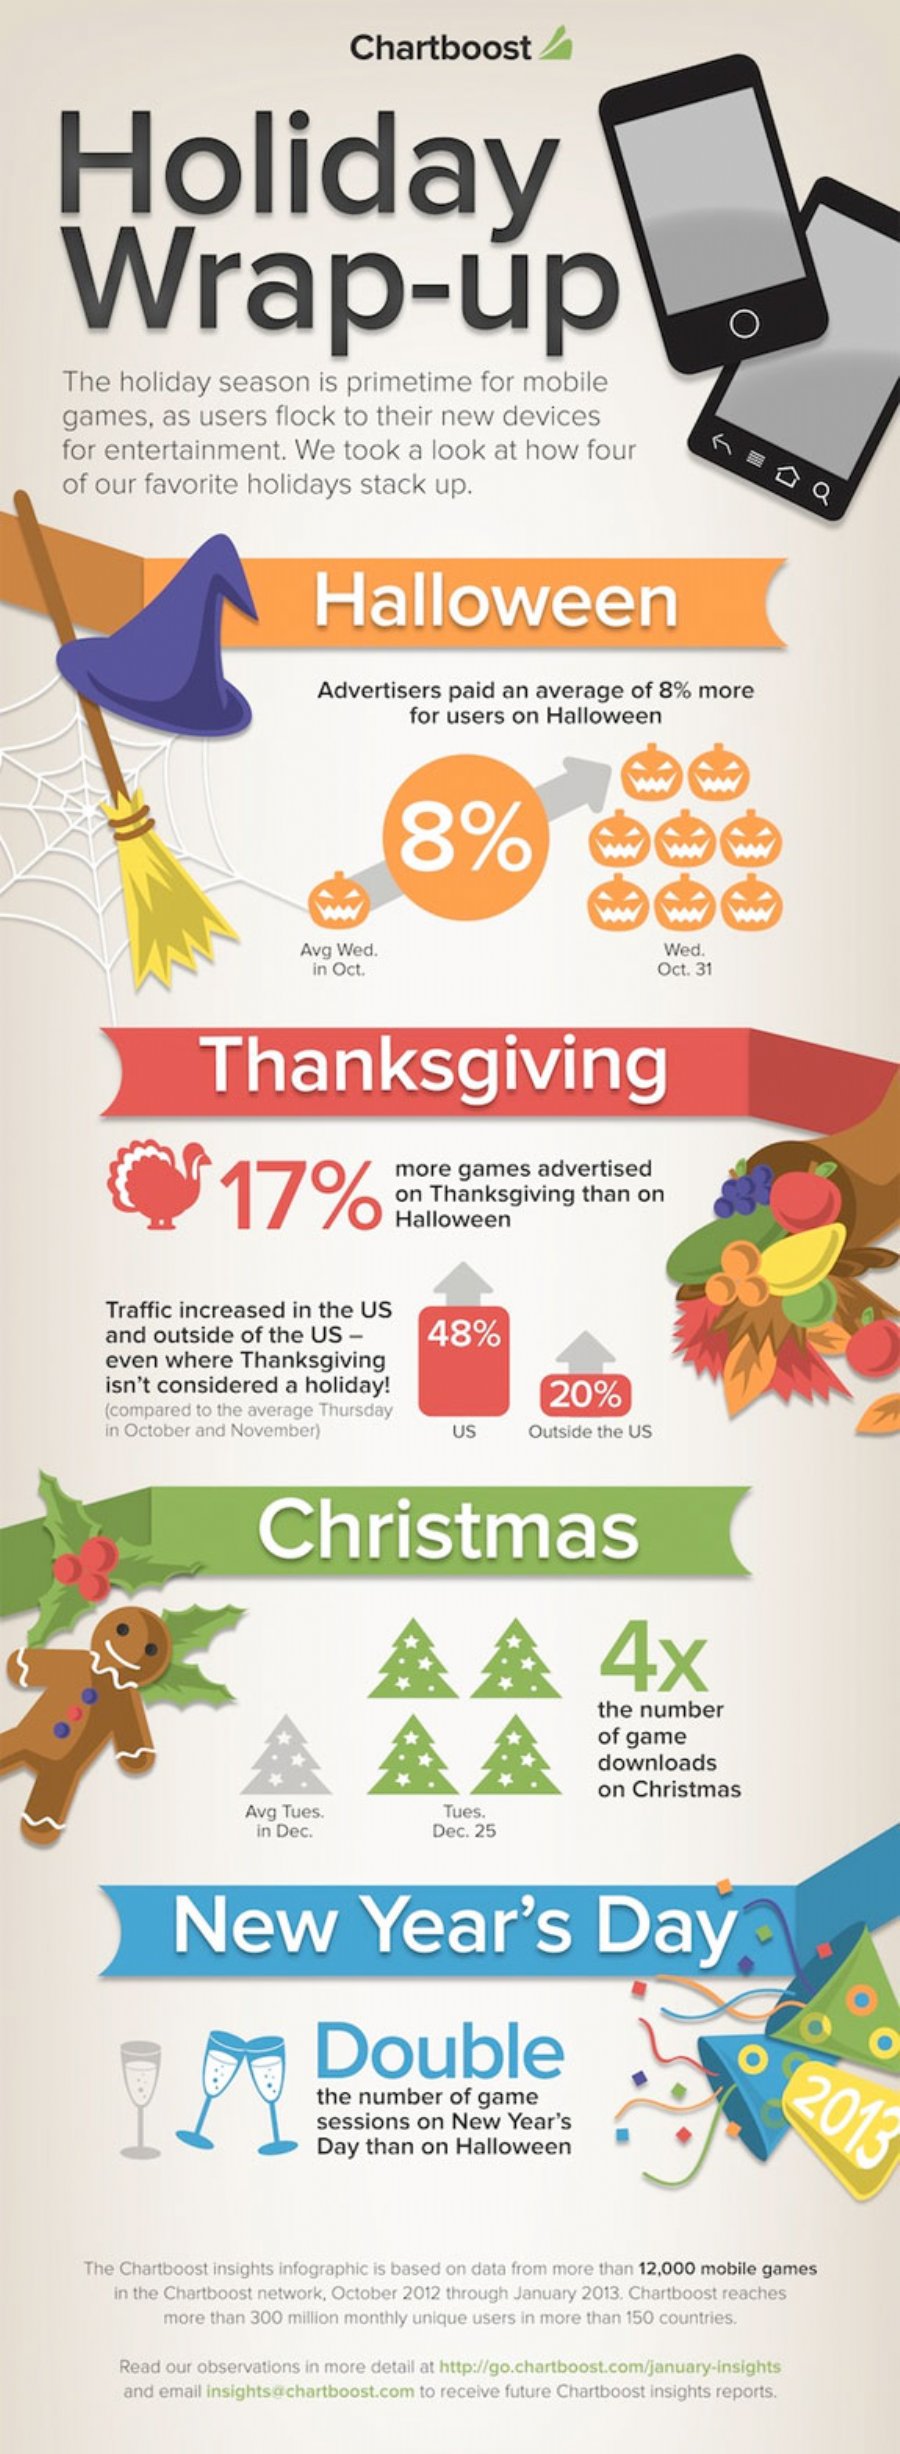 Chartboost releases their 2012 Holiday Wrap up